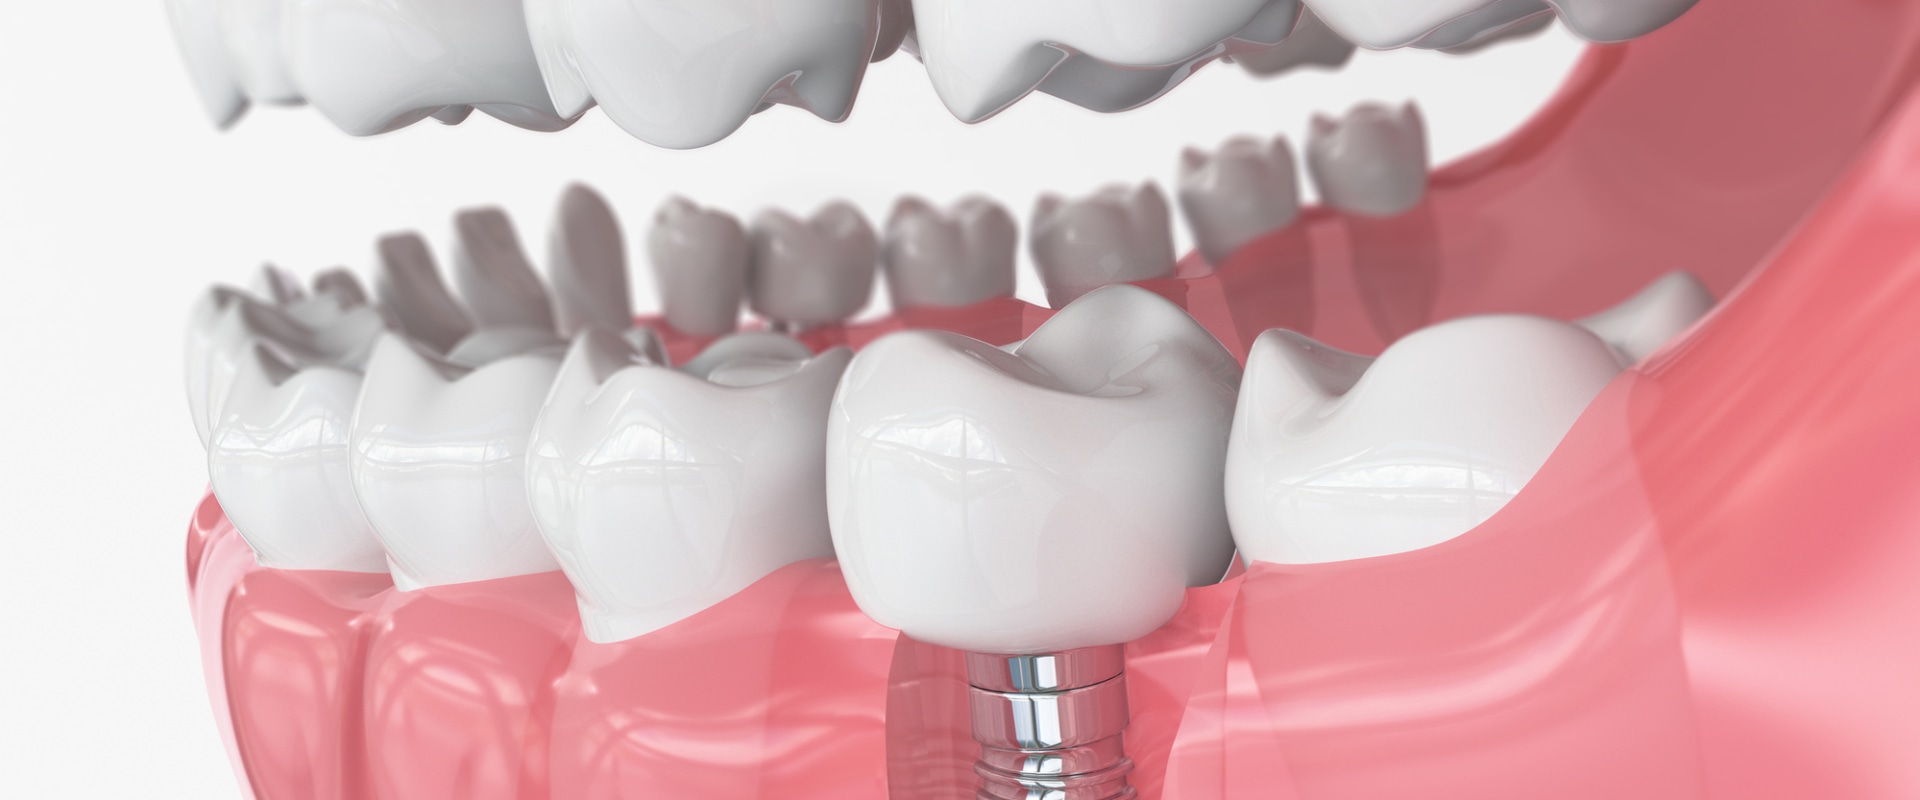 What Are the Two Main Types of Dental Implants